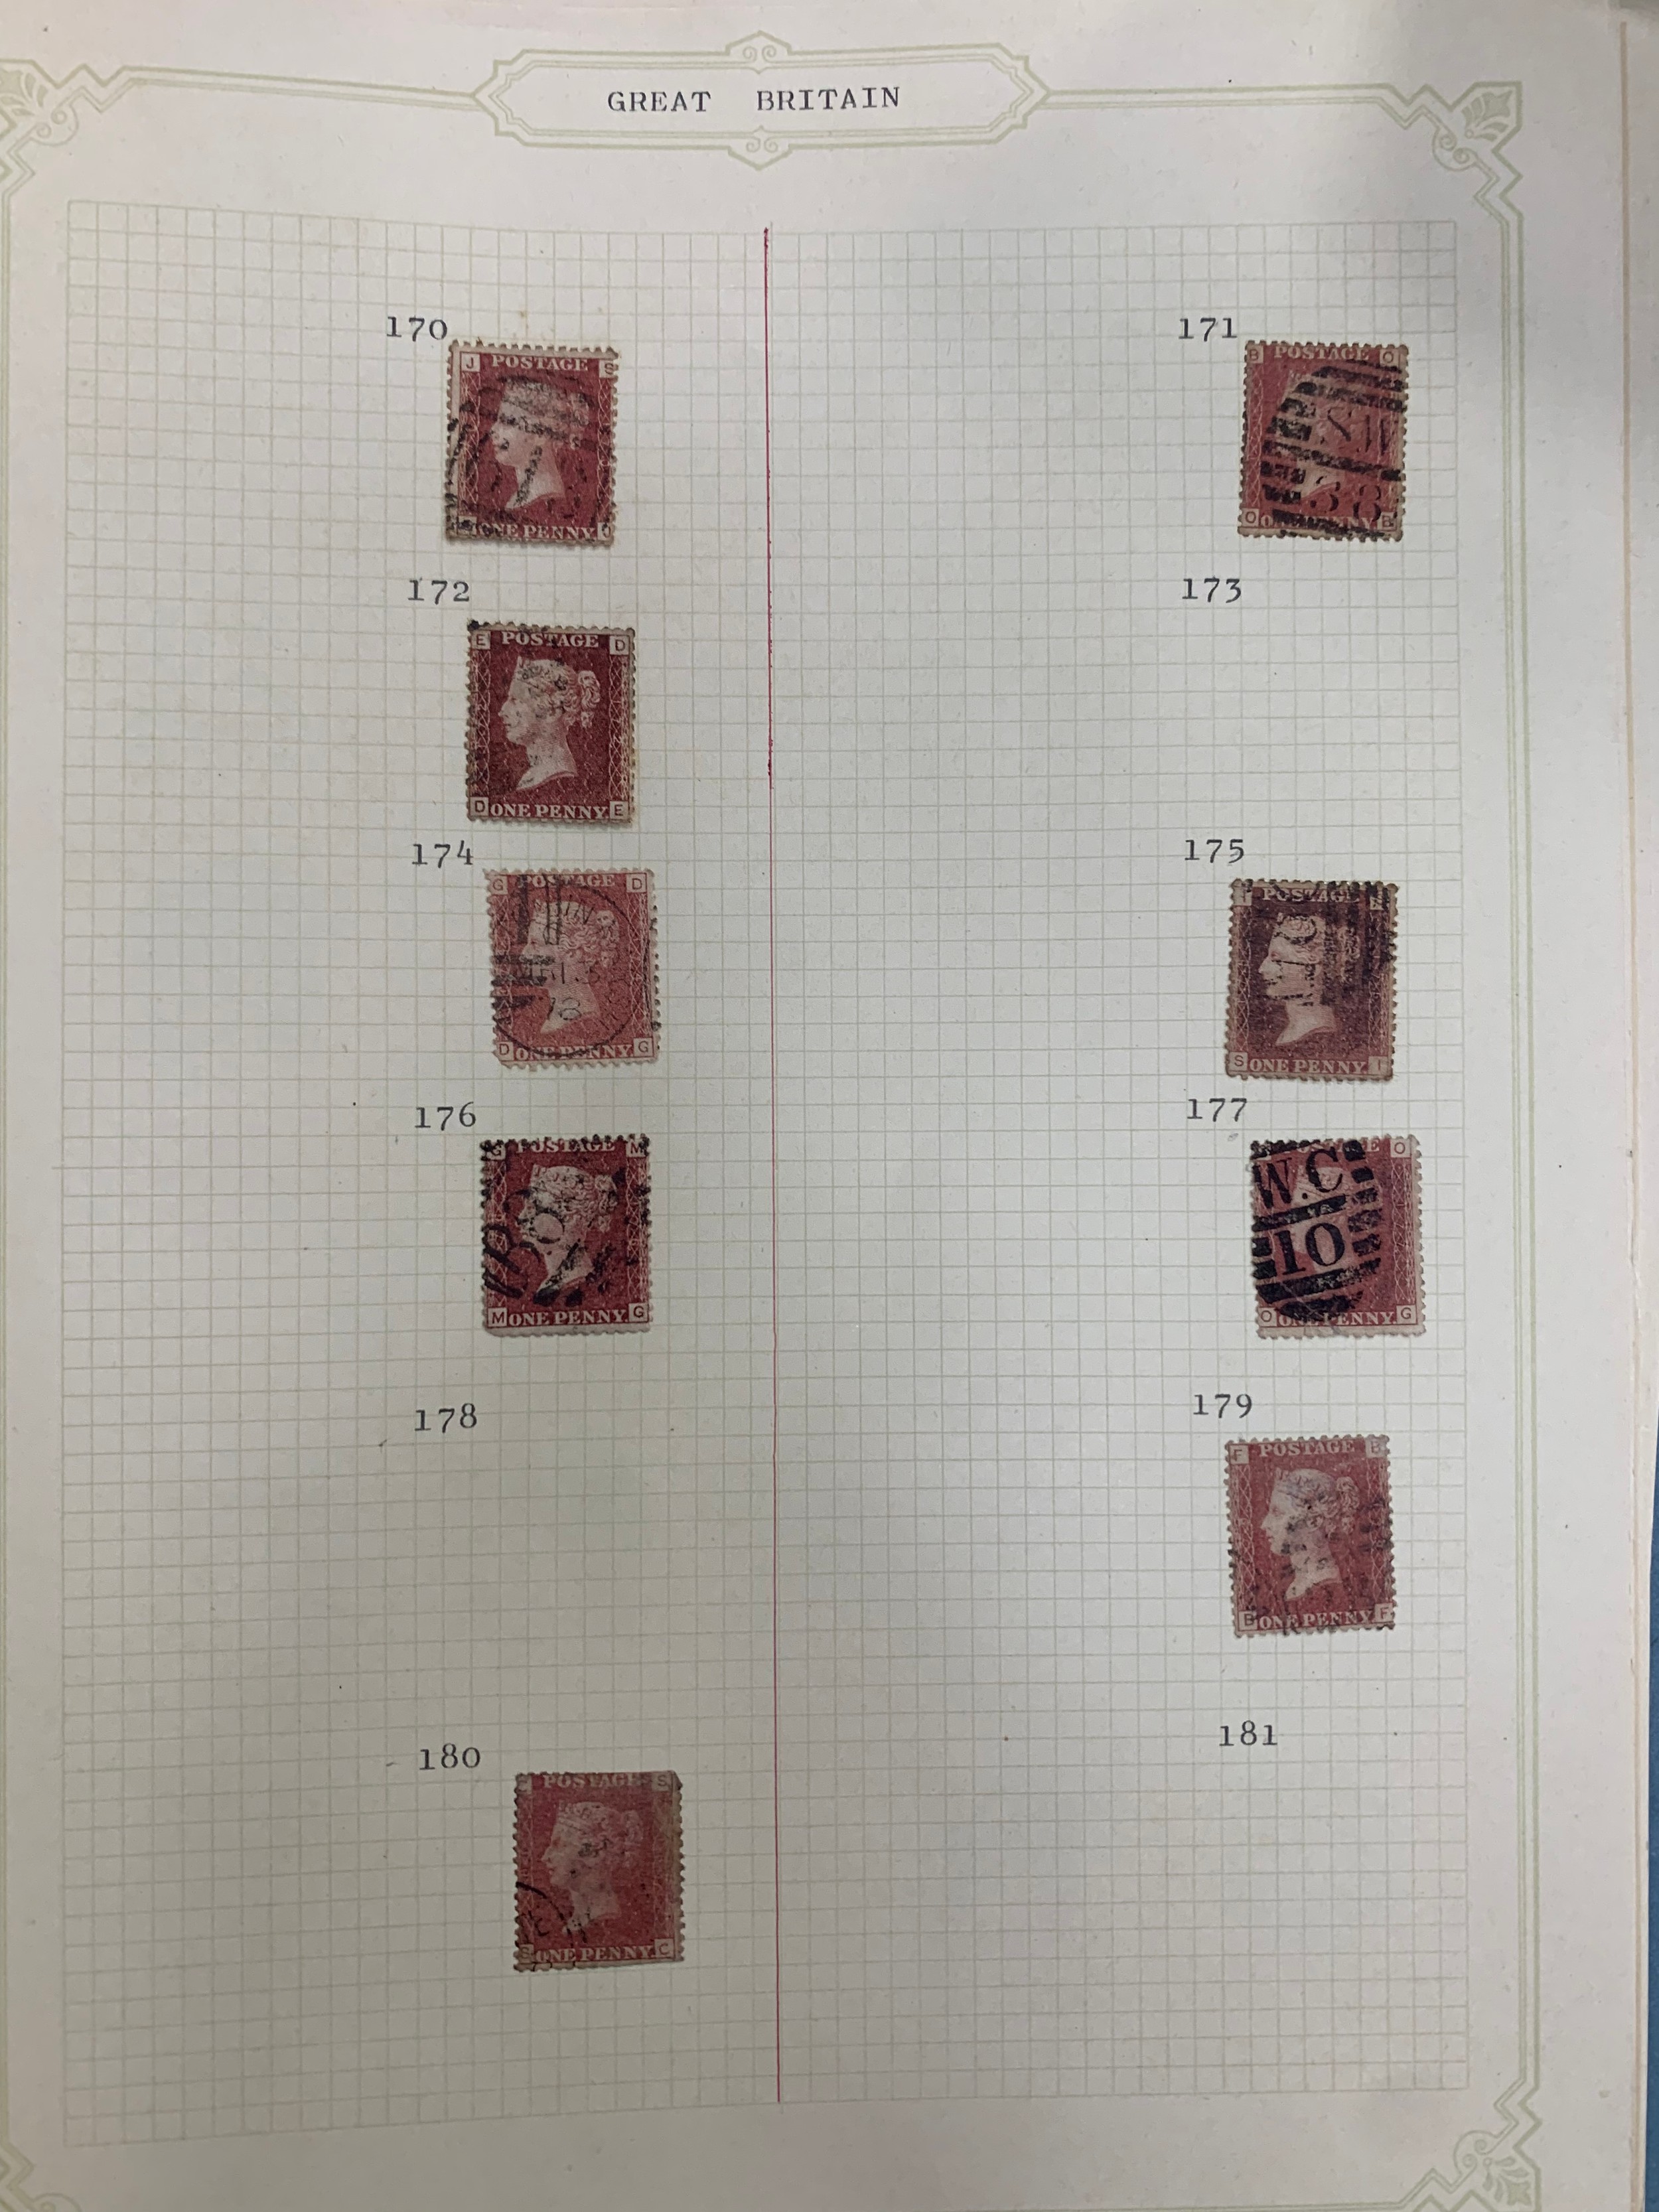 Great Britain, 1858-64 annotated and well-laid out collection of 1d Penny Reds FU from plate 73 to - Image 8 of 12